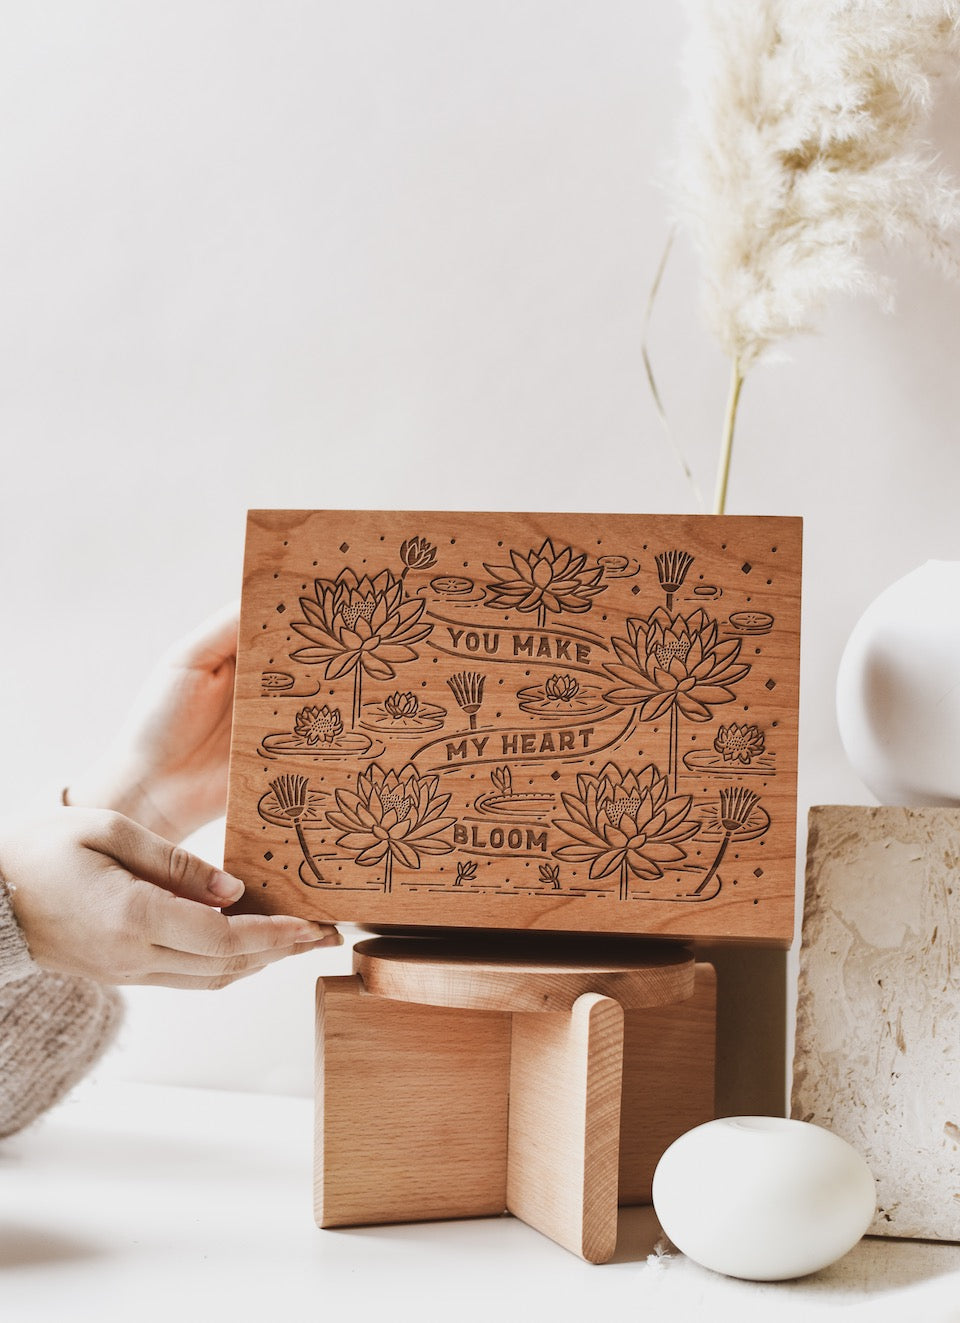 engraved wooden keepsake box with love quote